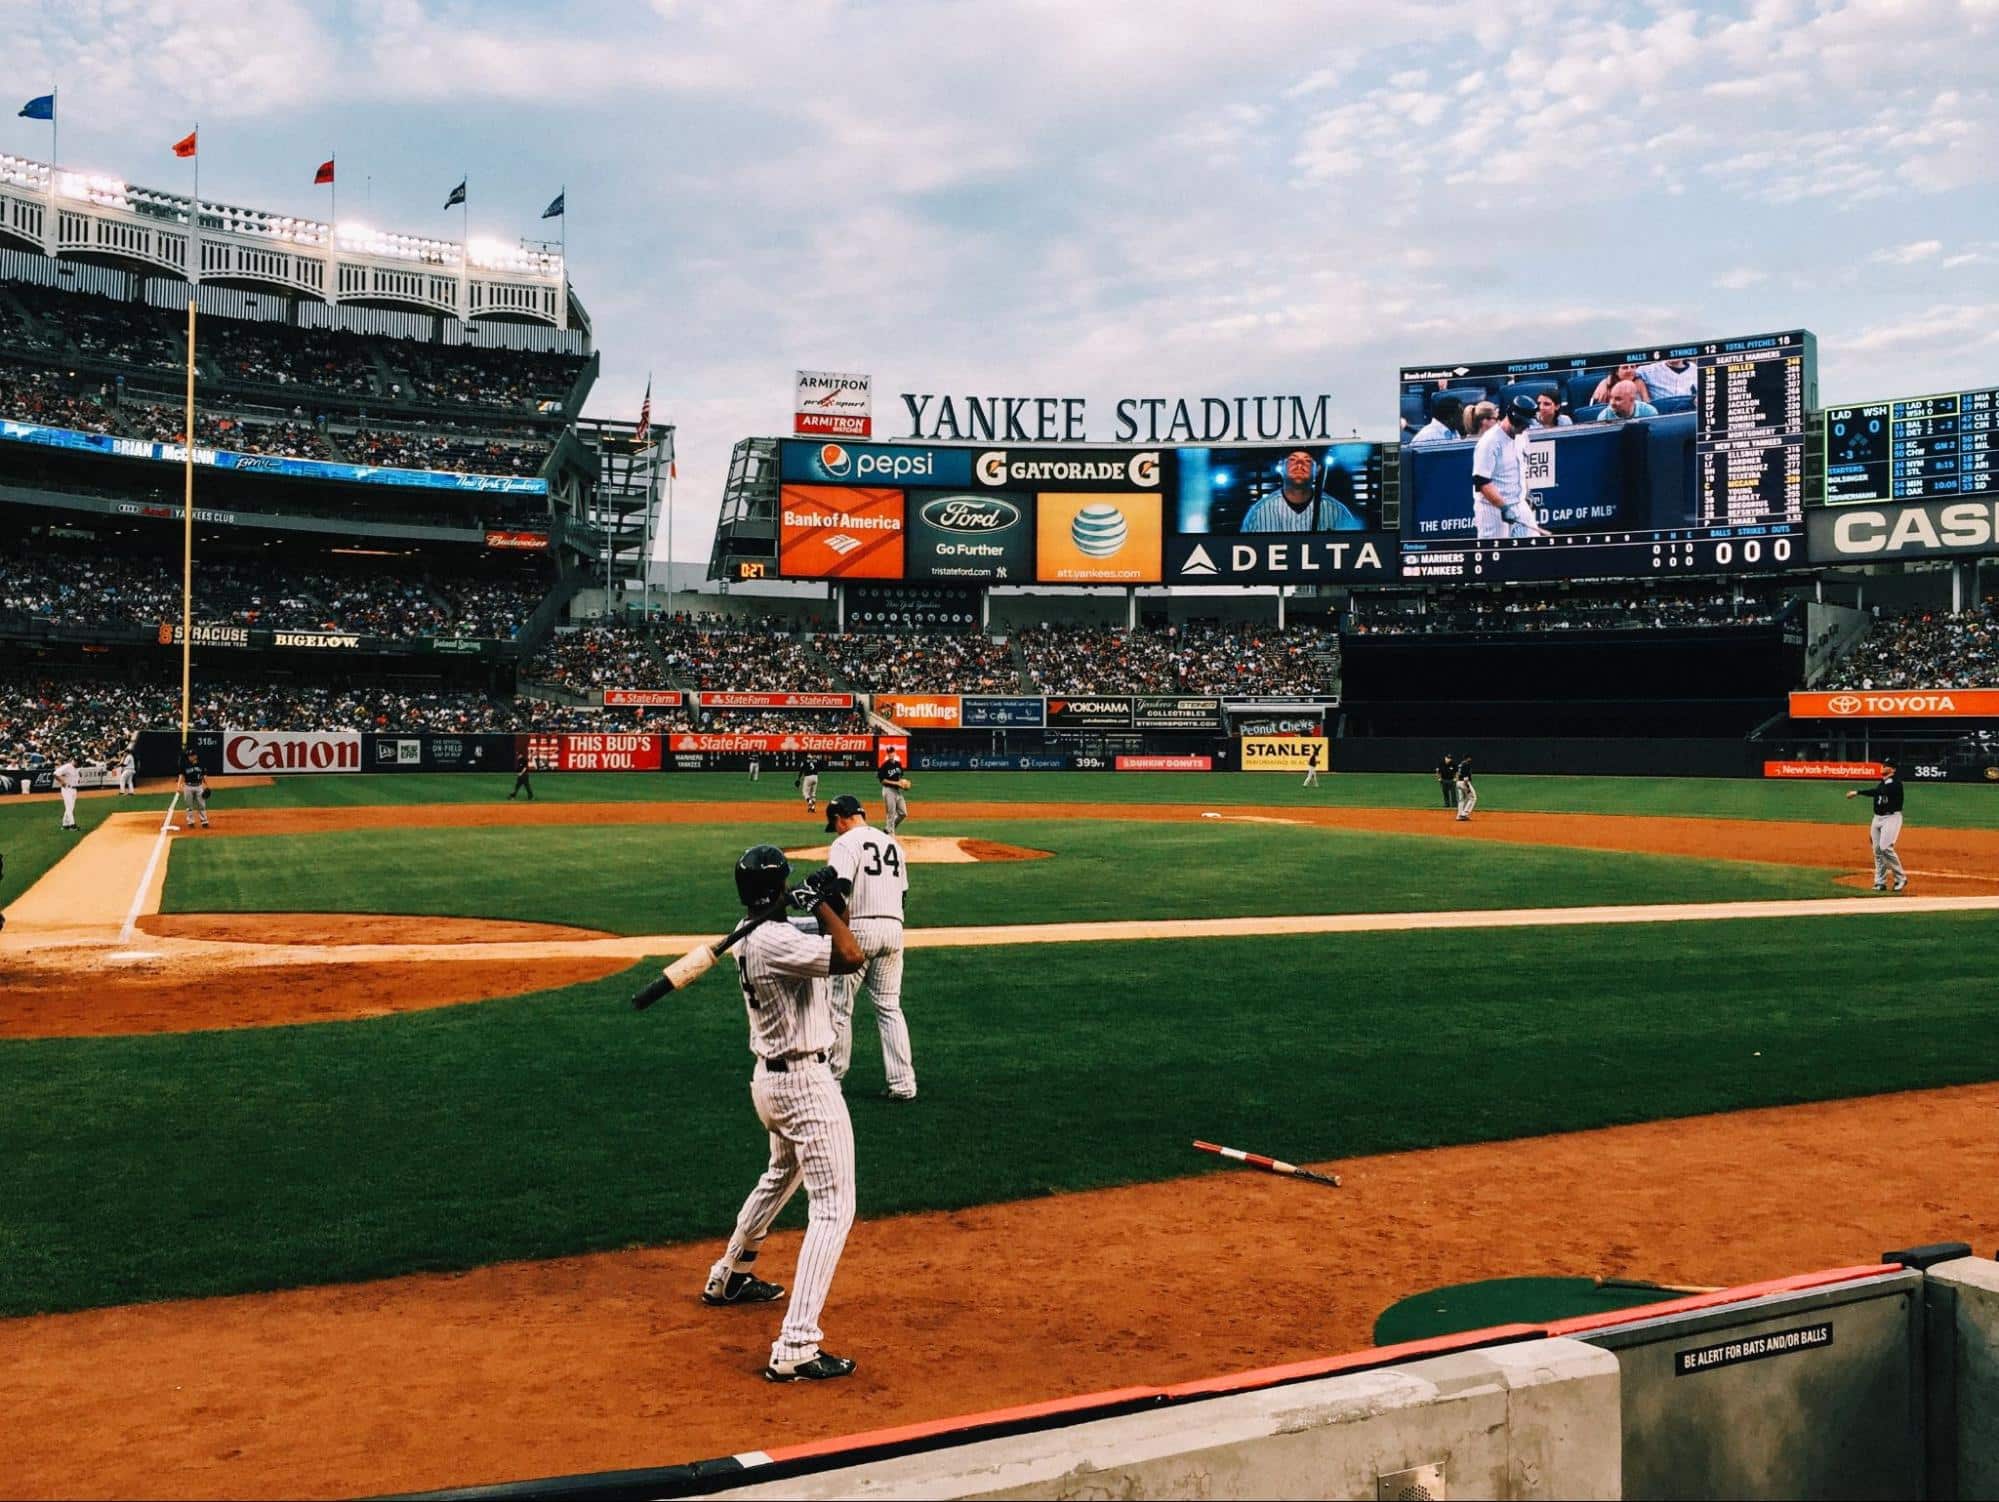 Yankee Stadium is an ideal spot for NYC groups to take in a game on their group trip